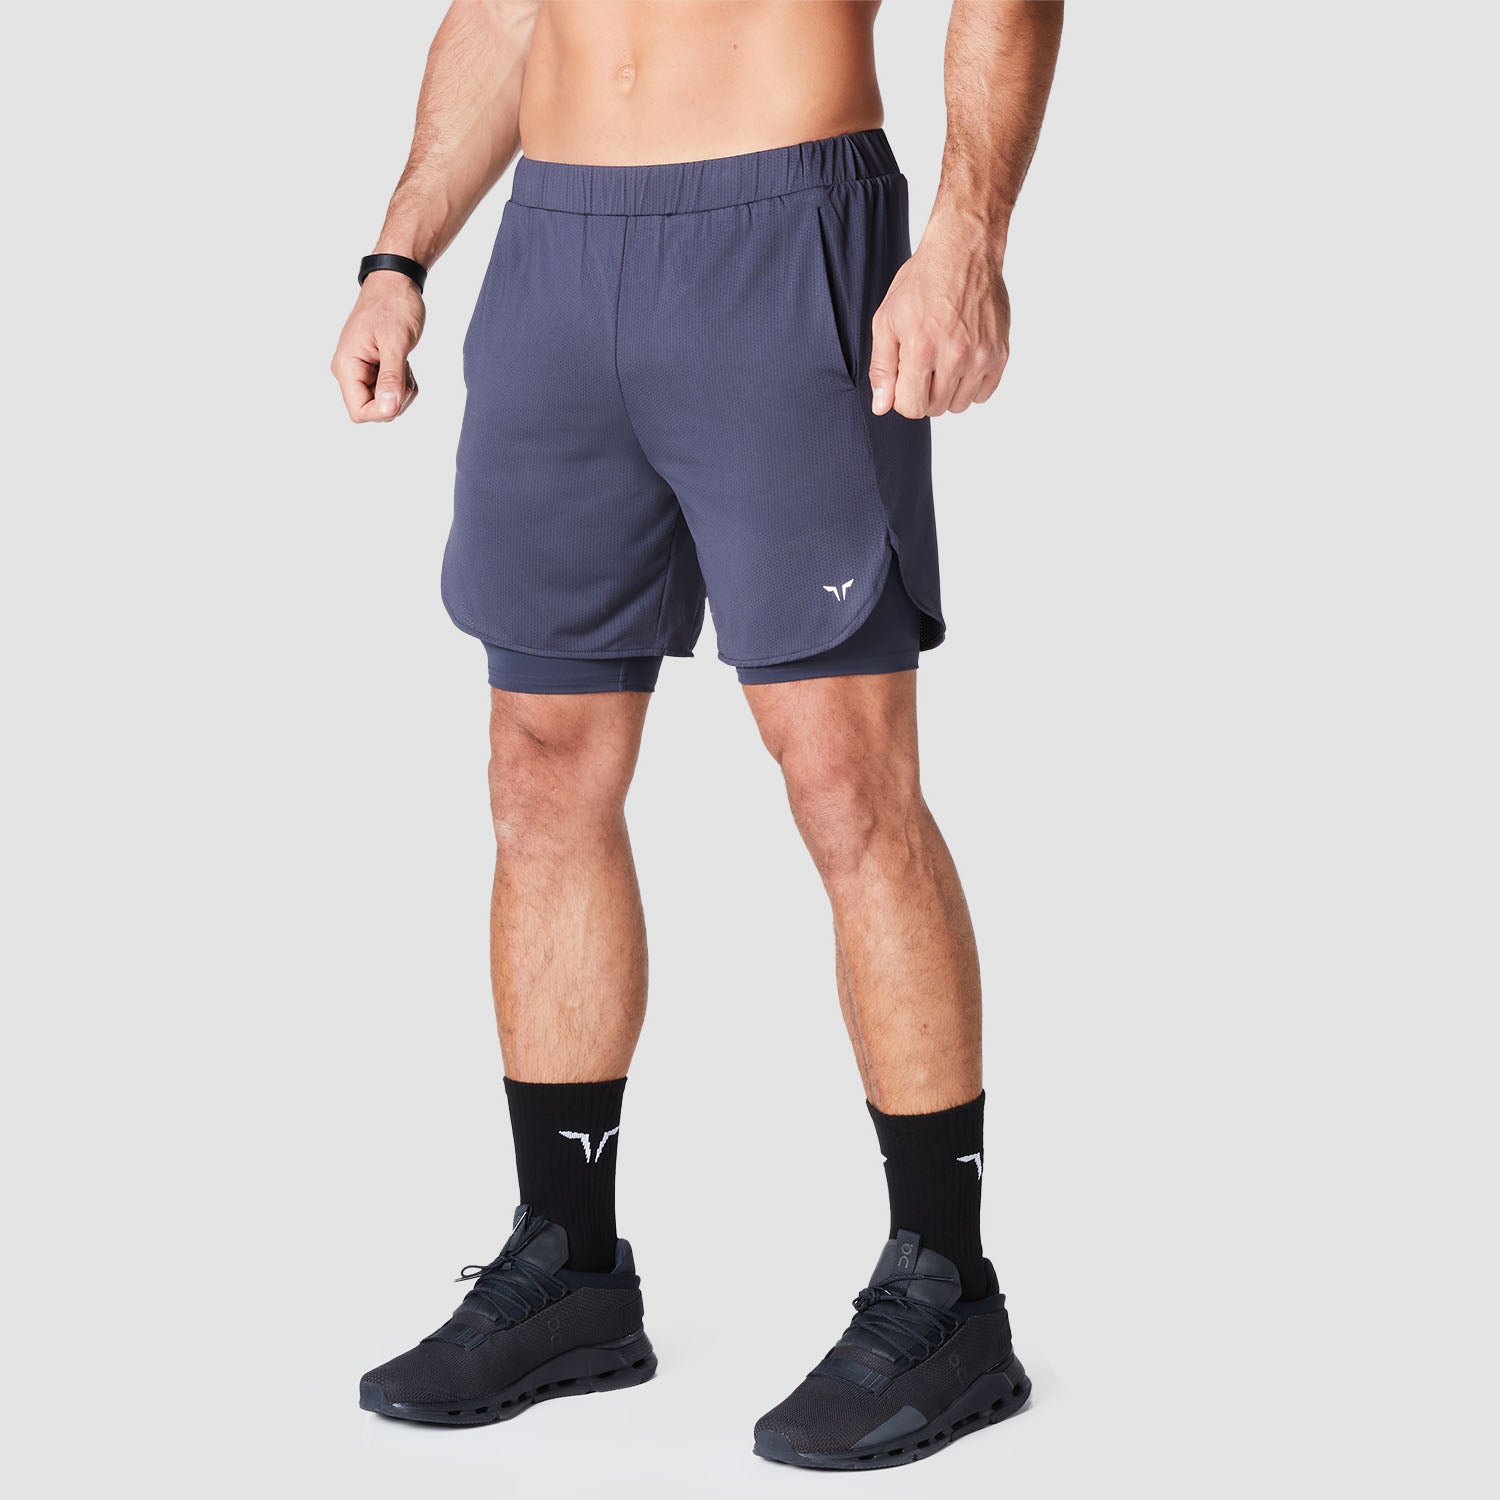 squatwolf-workout-short-for-men-core-mesh-2-in-1-shorts-charcoal-gym-wear